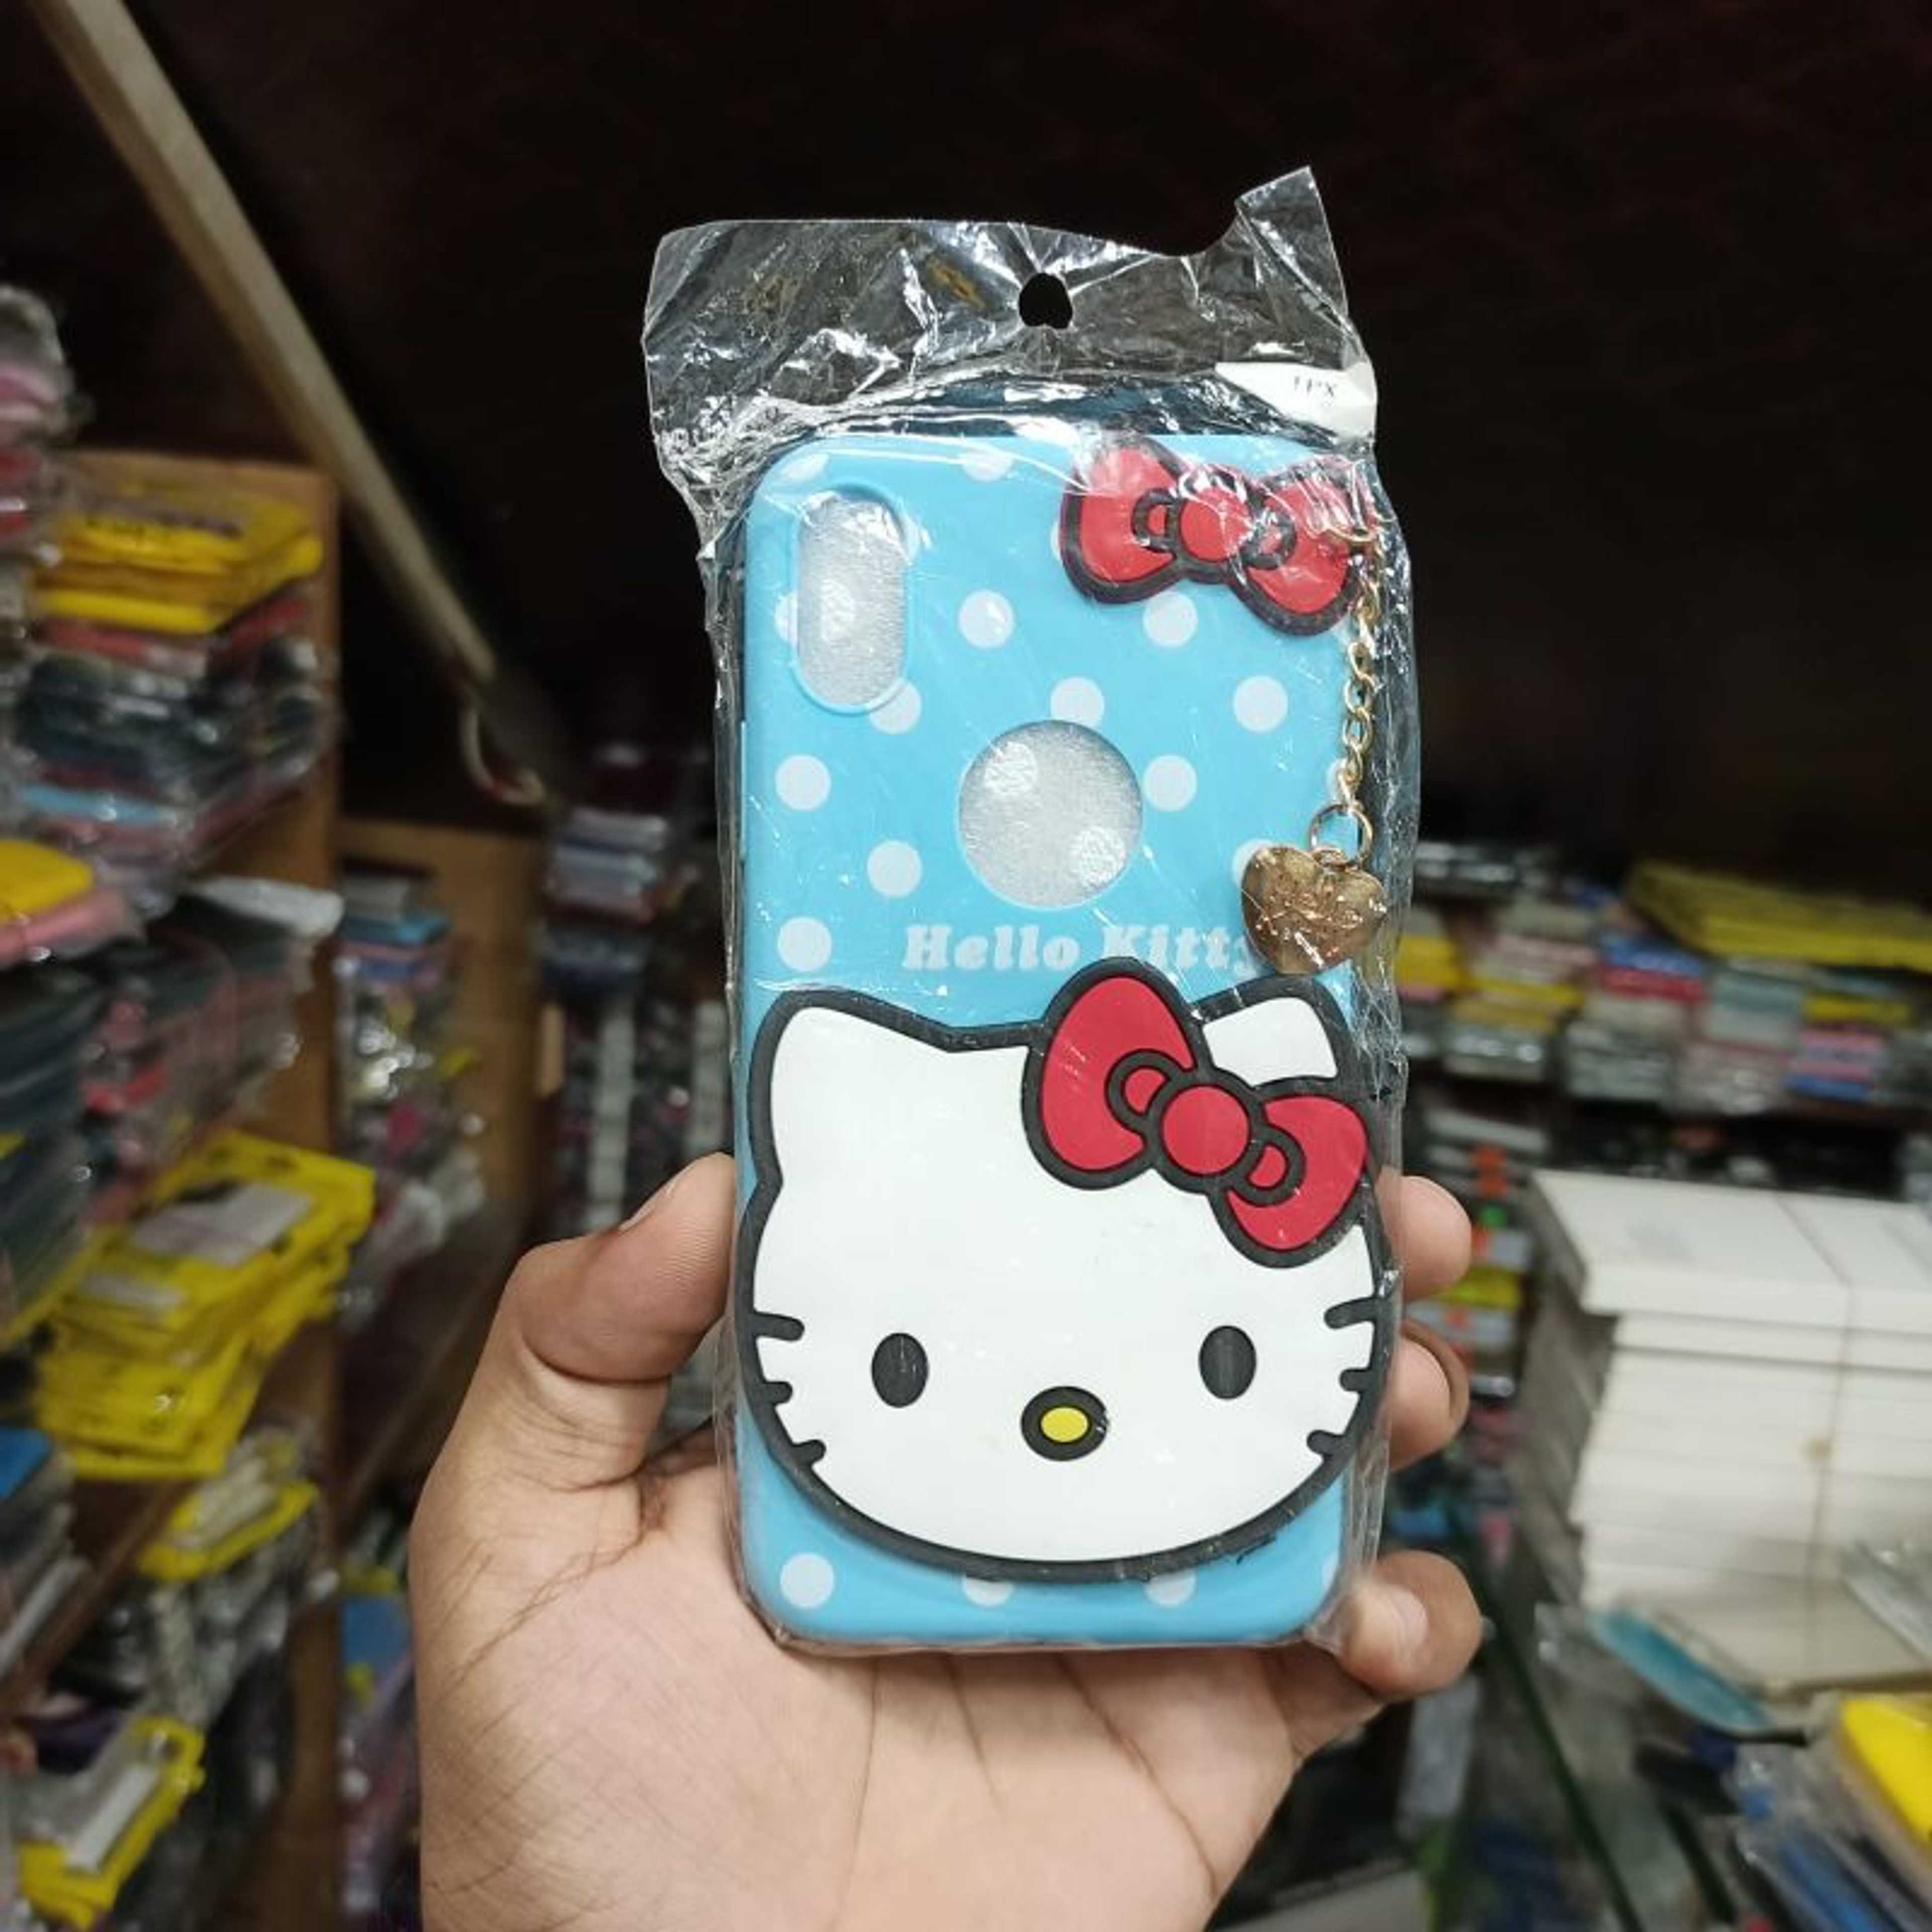 Hello Kitty Soft Silicon Cover Case for iPhone X 